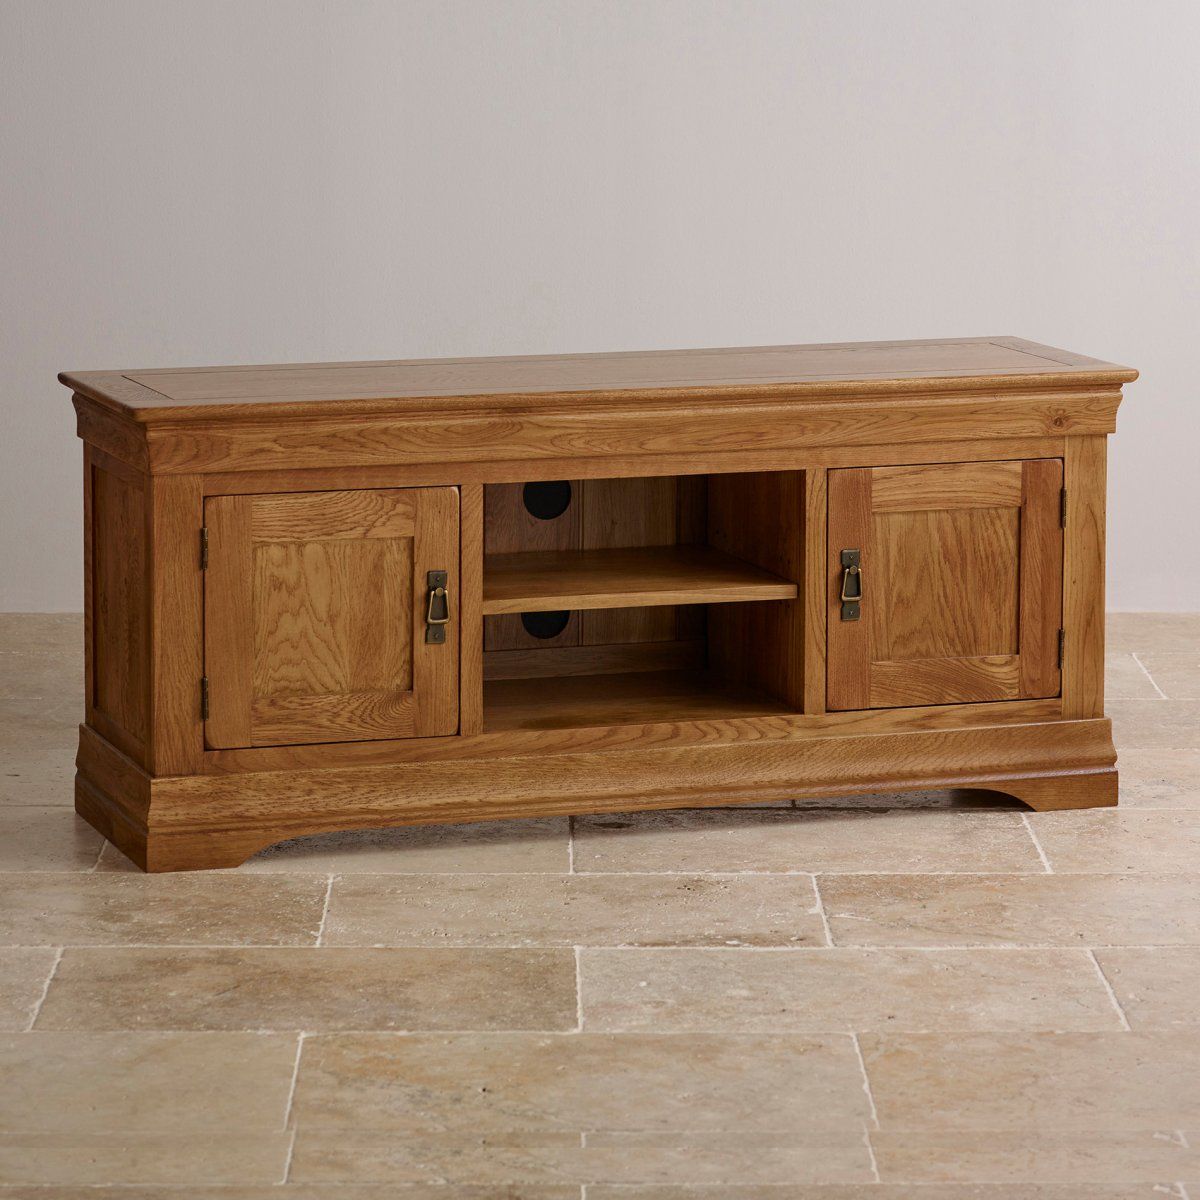 French Farmhouse Tv Cabinet In Solid Oak | Oak Furniture Land For Large Oak Tv Cabinets (View 9 of 15)